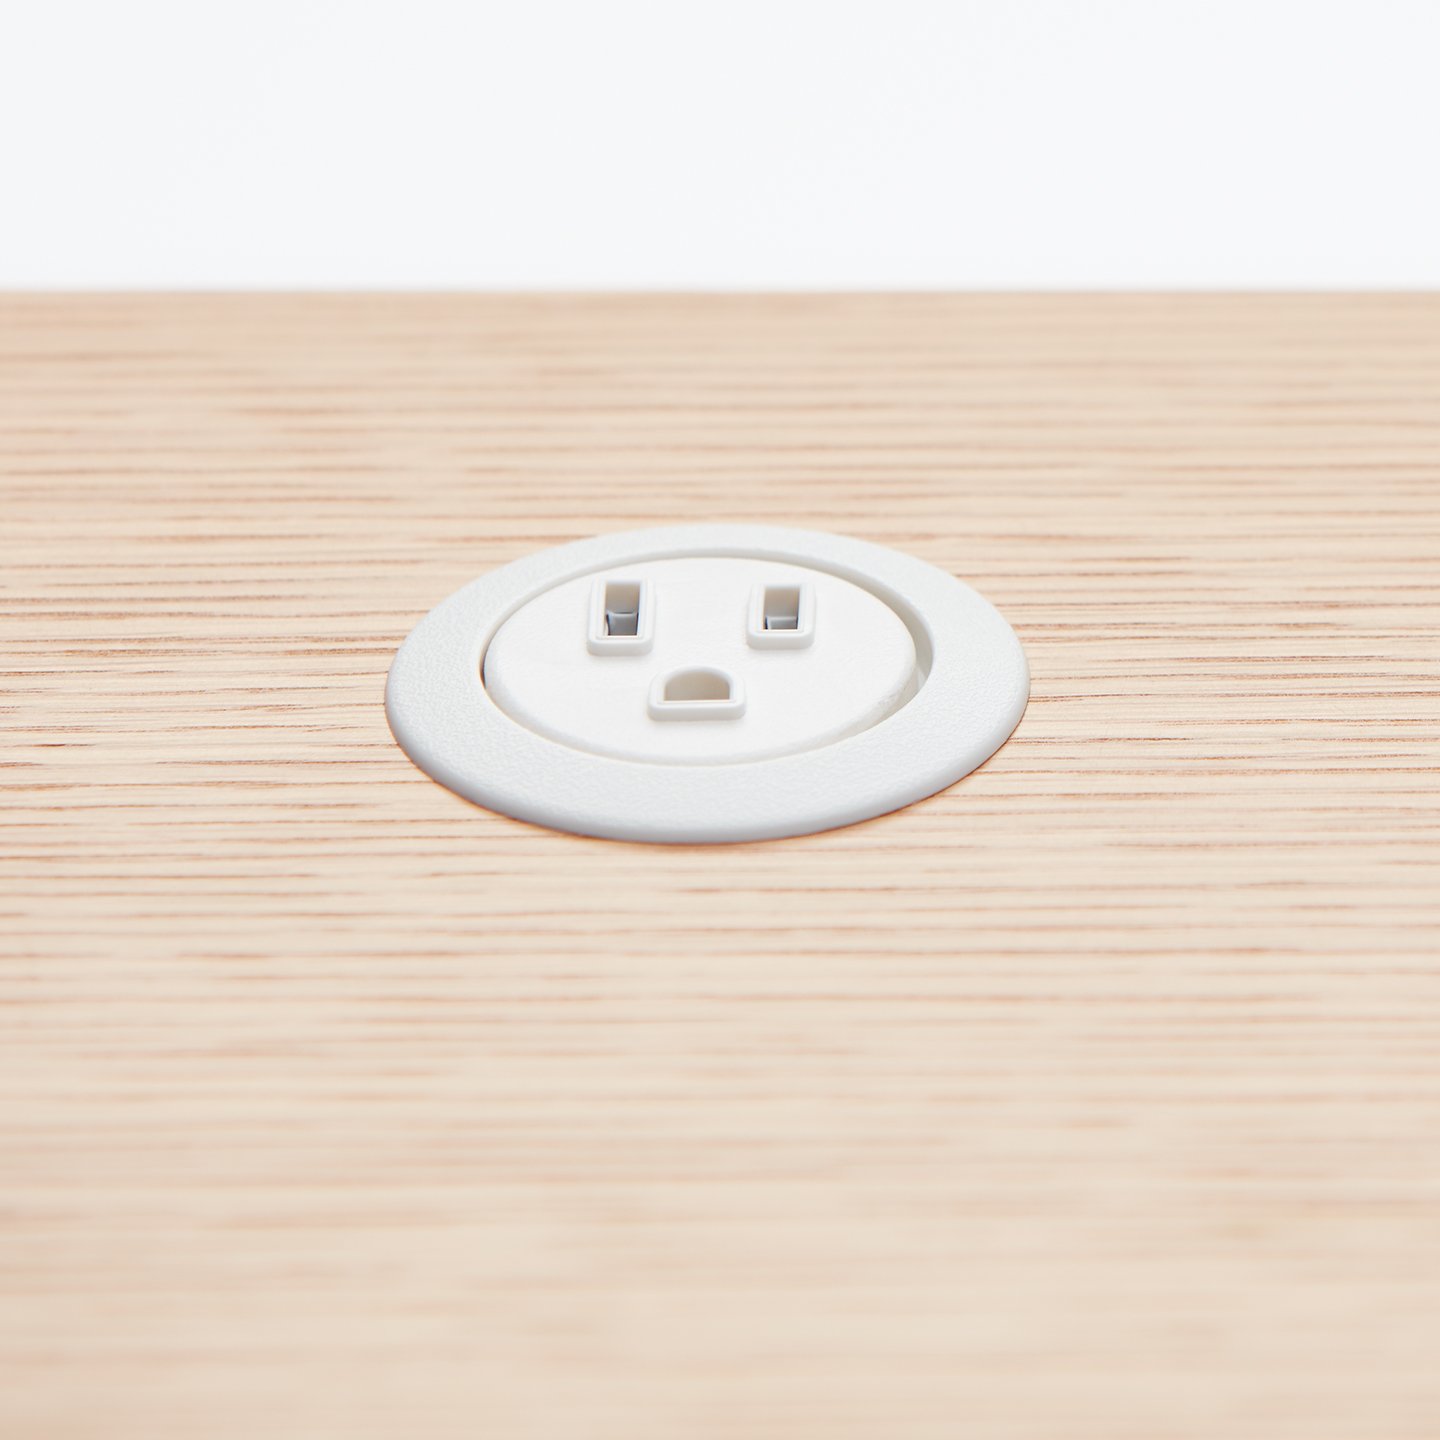 Haworth Collaborative Power Accessories wall outlet charging port built into a desk